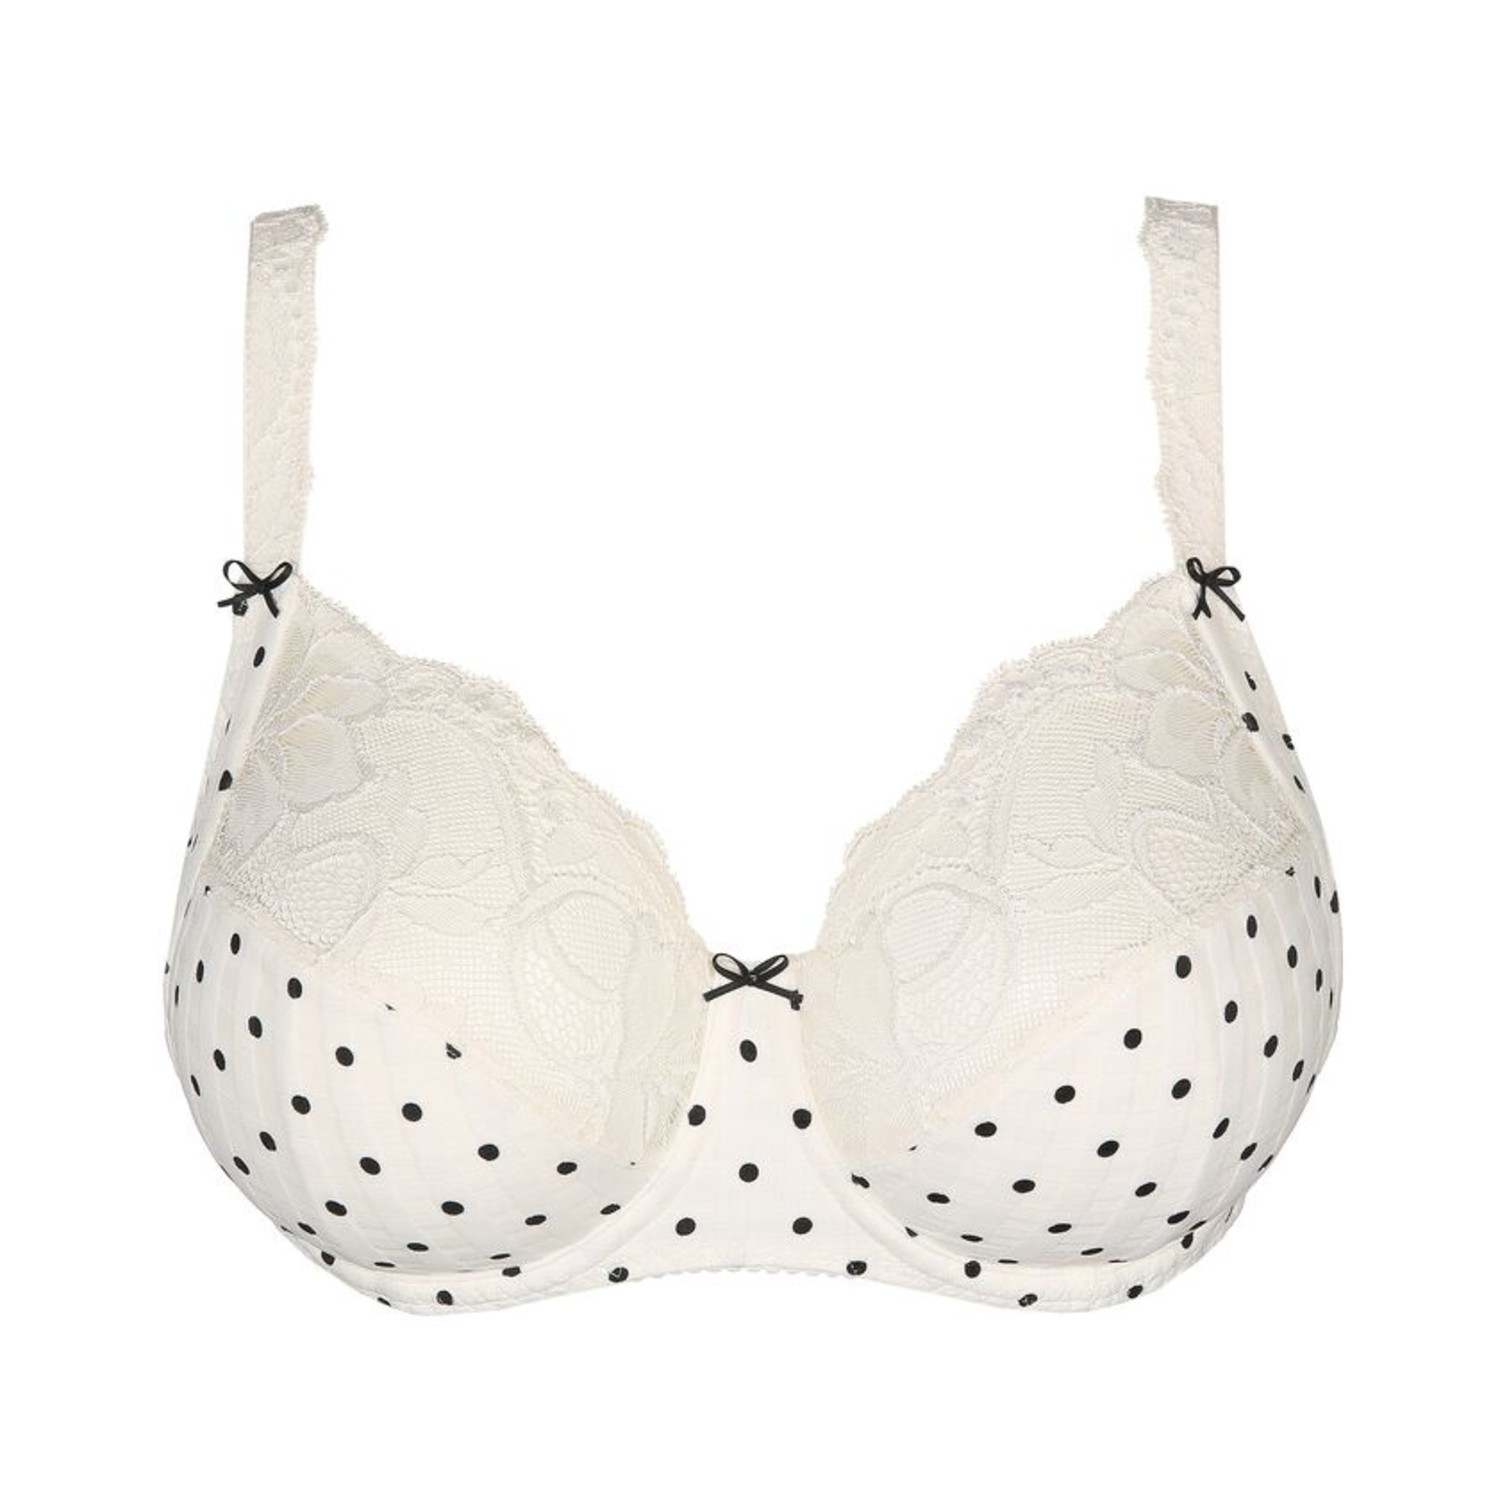 Madison Full Cup Bra 0162120/1 Scarlet - Lace & Day